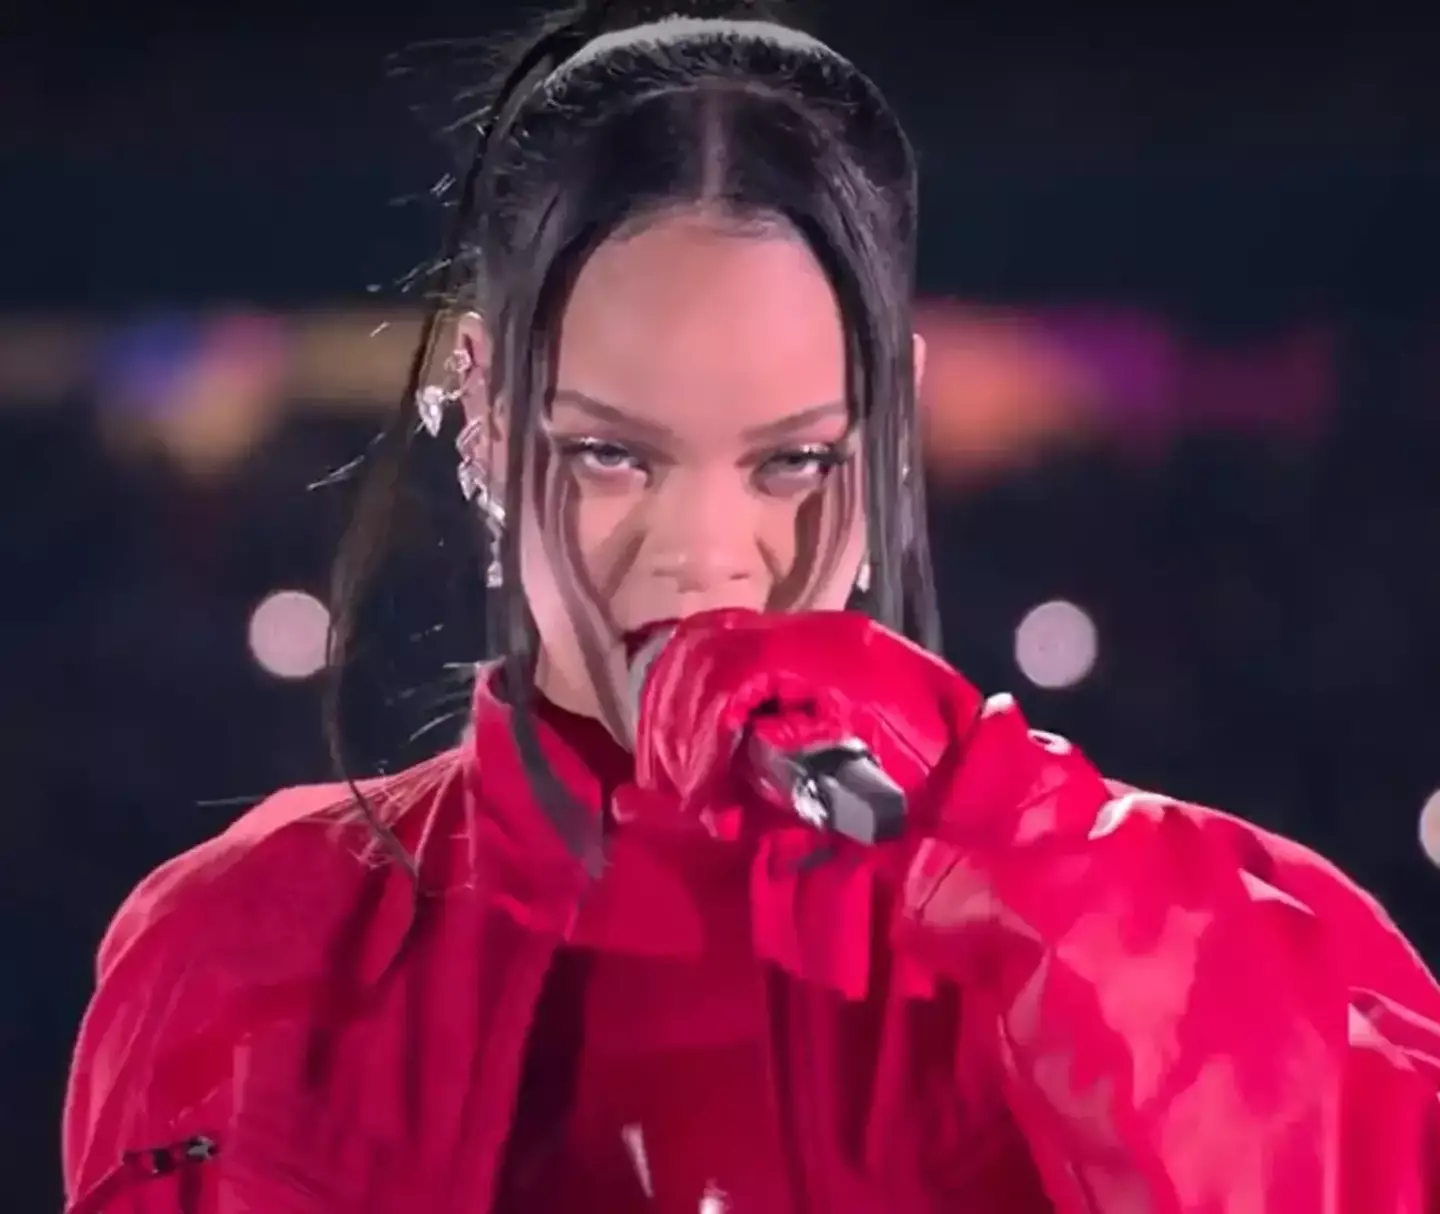 Rihanna displayed her baby bump during her epic Super Bowl performance.